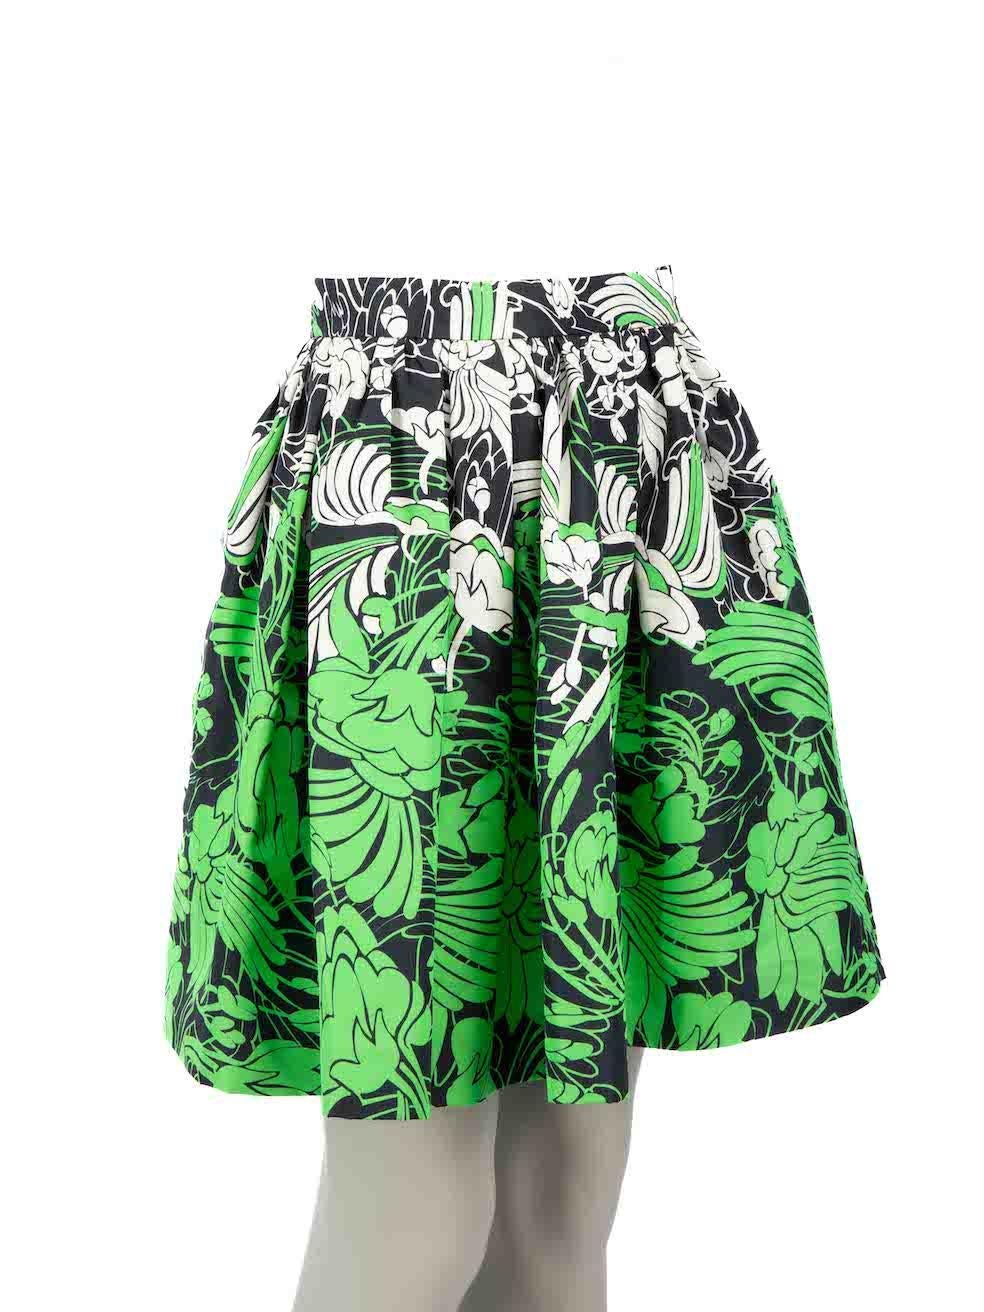 CONDITION is Very good. Minimal wear to skirt is evident. Side hook fastening is missing on this used Miu Miu designer resale item.
 
Details
Green
Silk
Skirt
Floral pattern
Pleated
Mini
Side zip and hook fastening
 
Made in Italy
 
Composition
100%